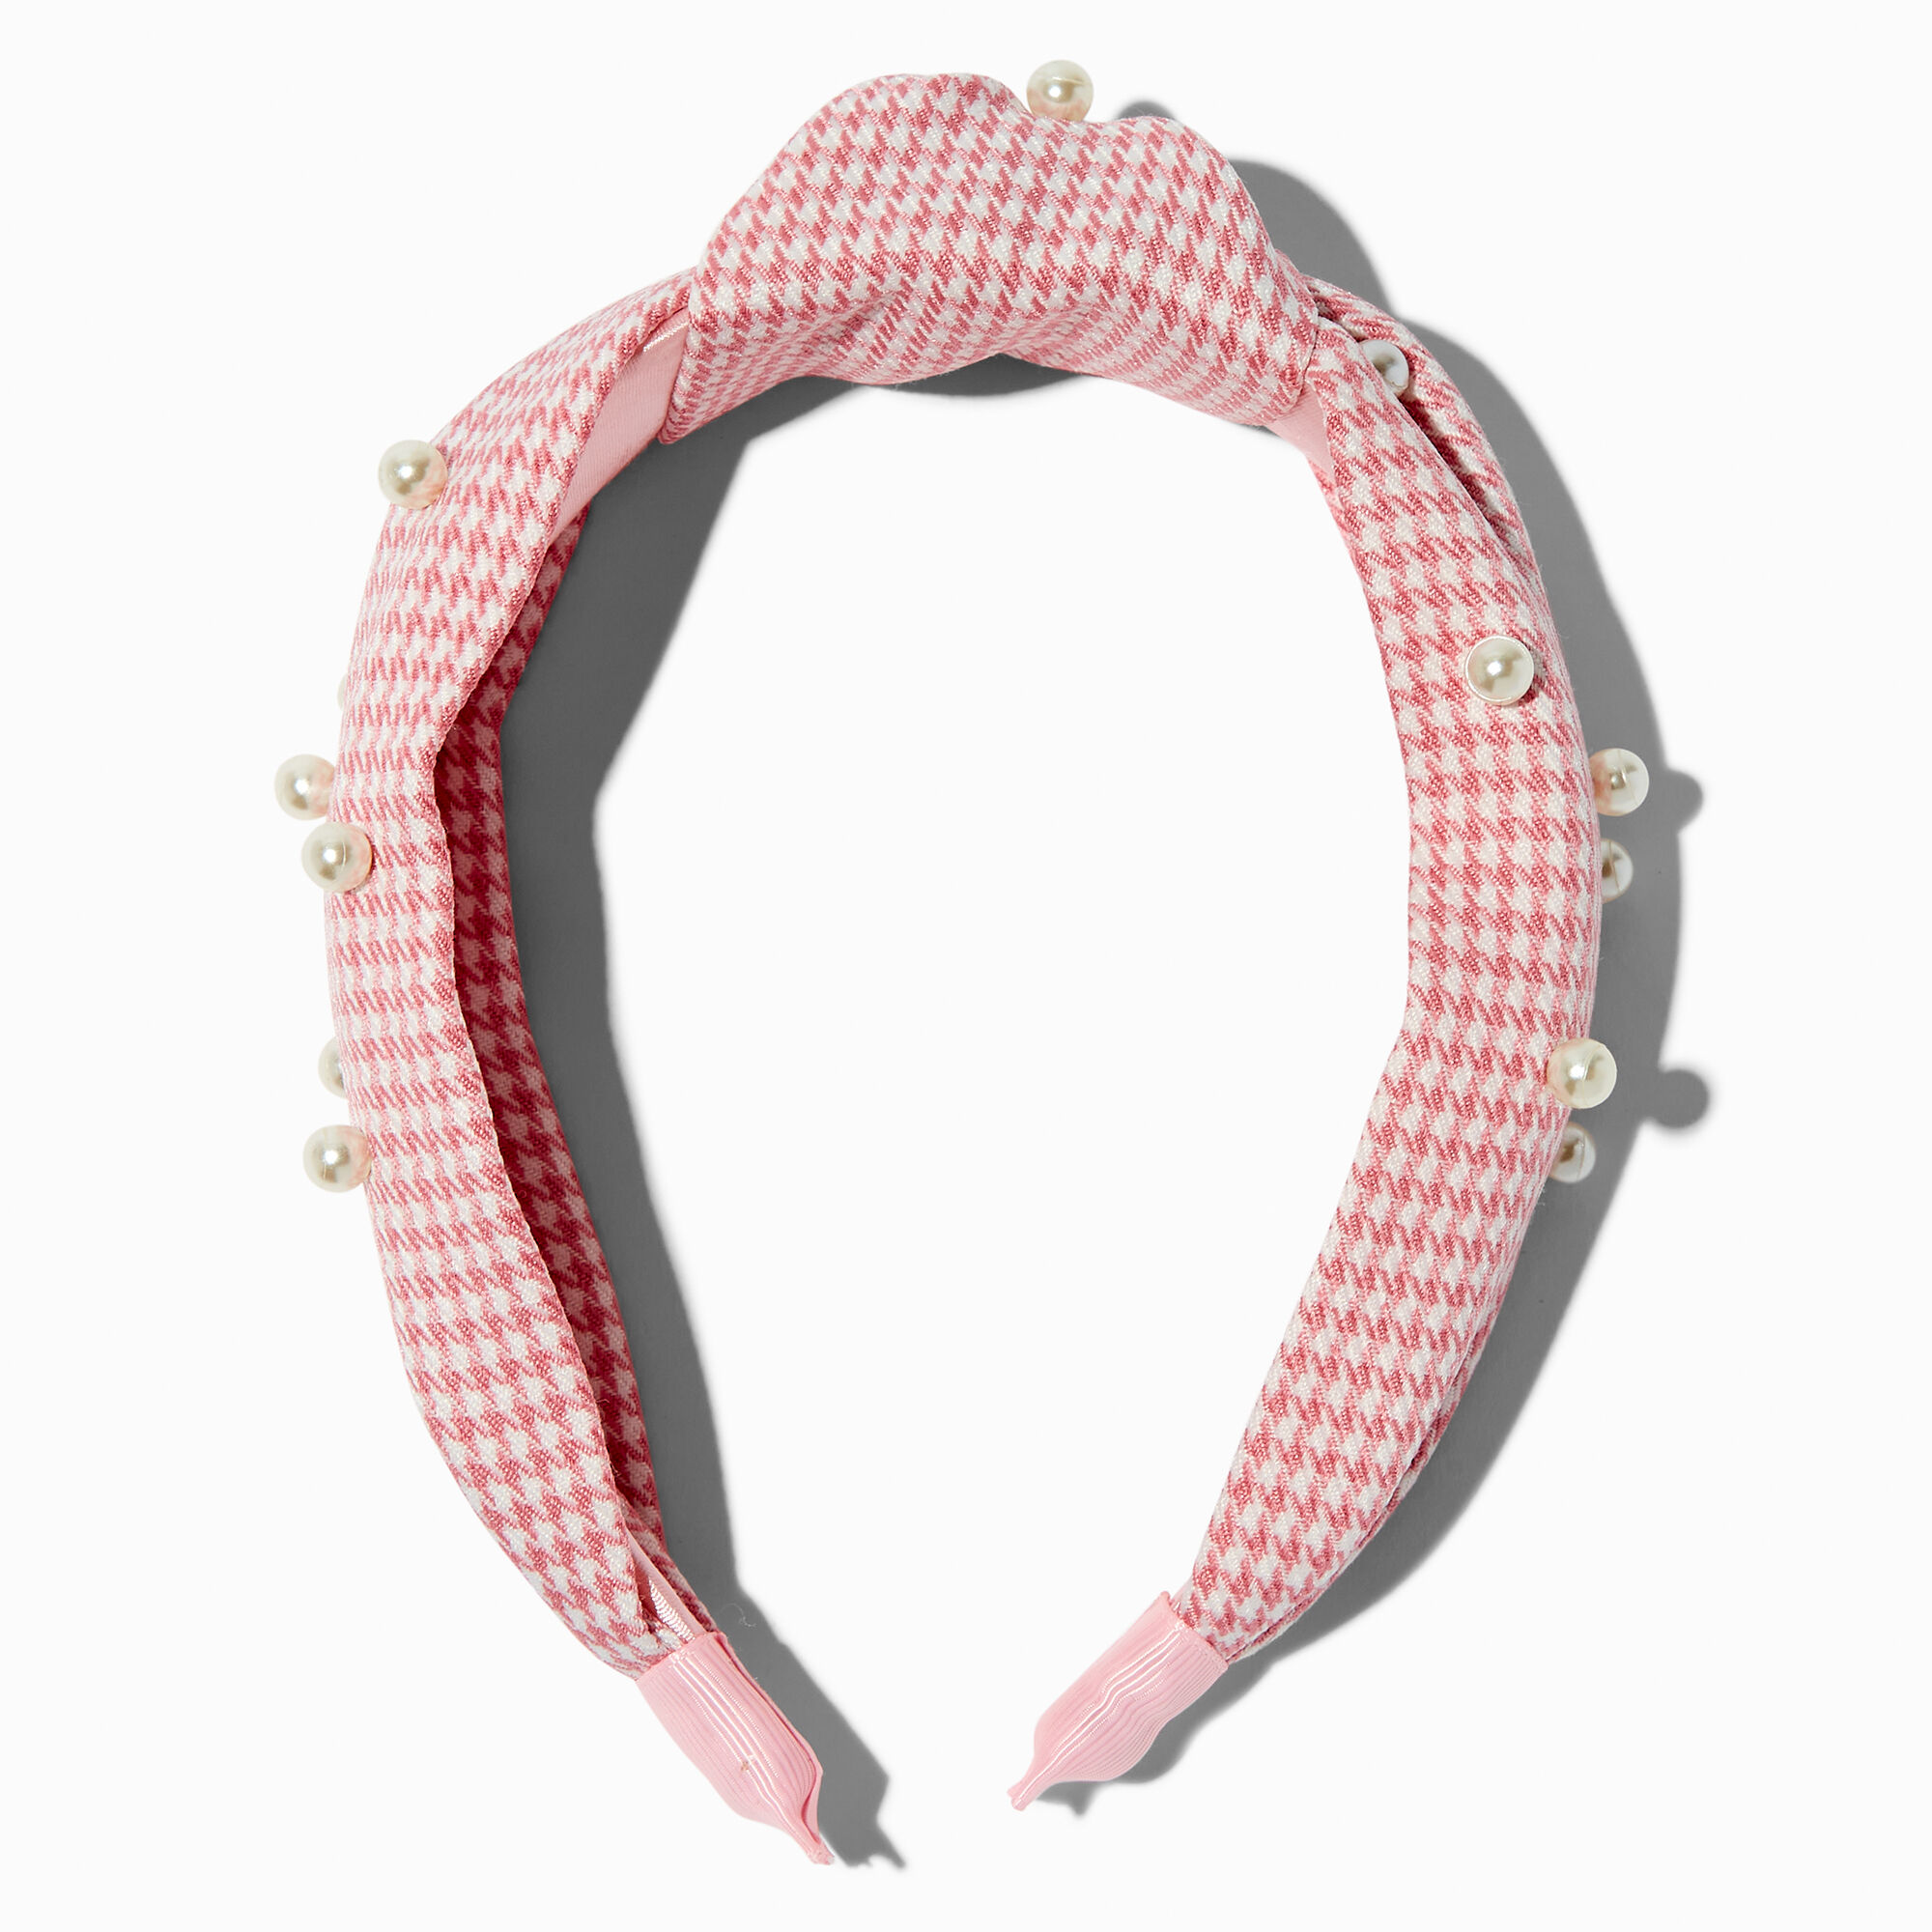 View Mean Girls X Claires Houndstooth Pearl Knotted Headband Pink information